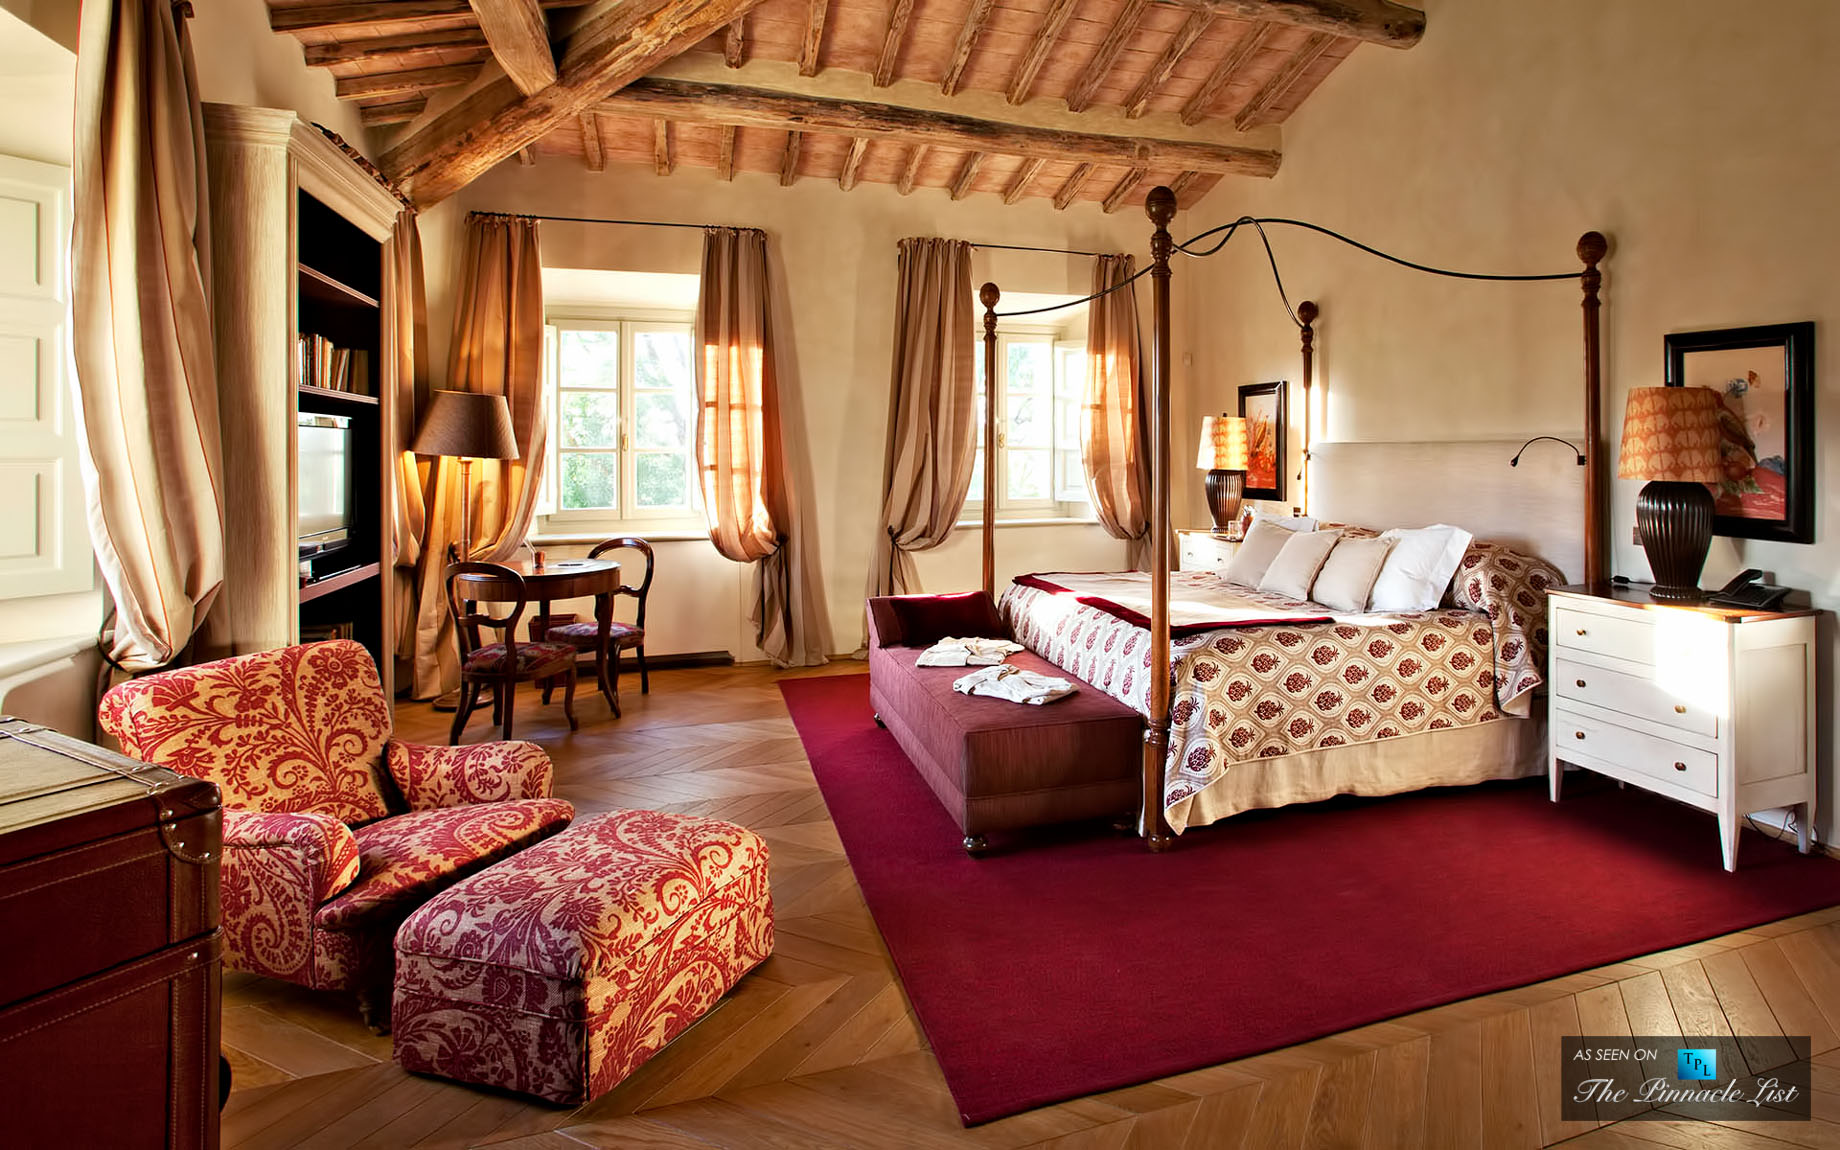 Casa Biondi – Tuscany, Italy – The 5 Best Rural Villas in the Mediterranean for Luxury Retreats